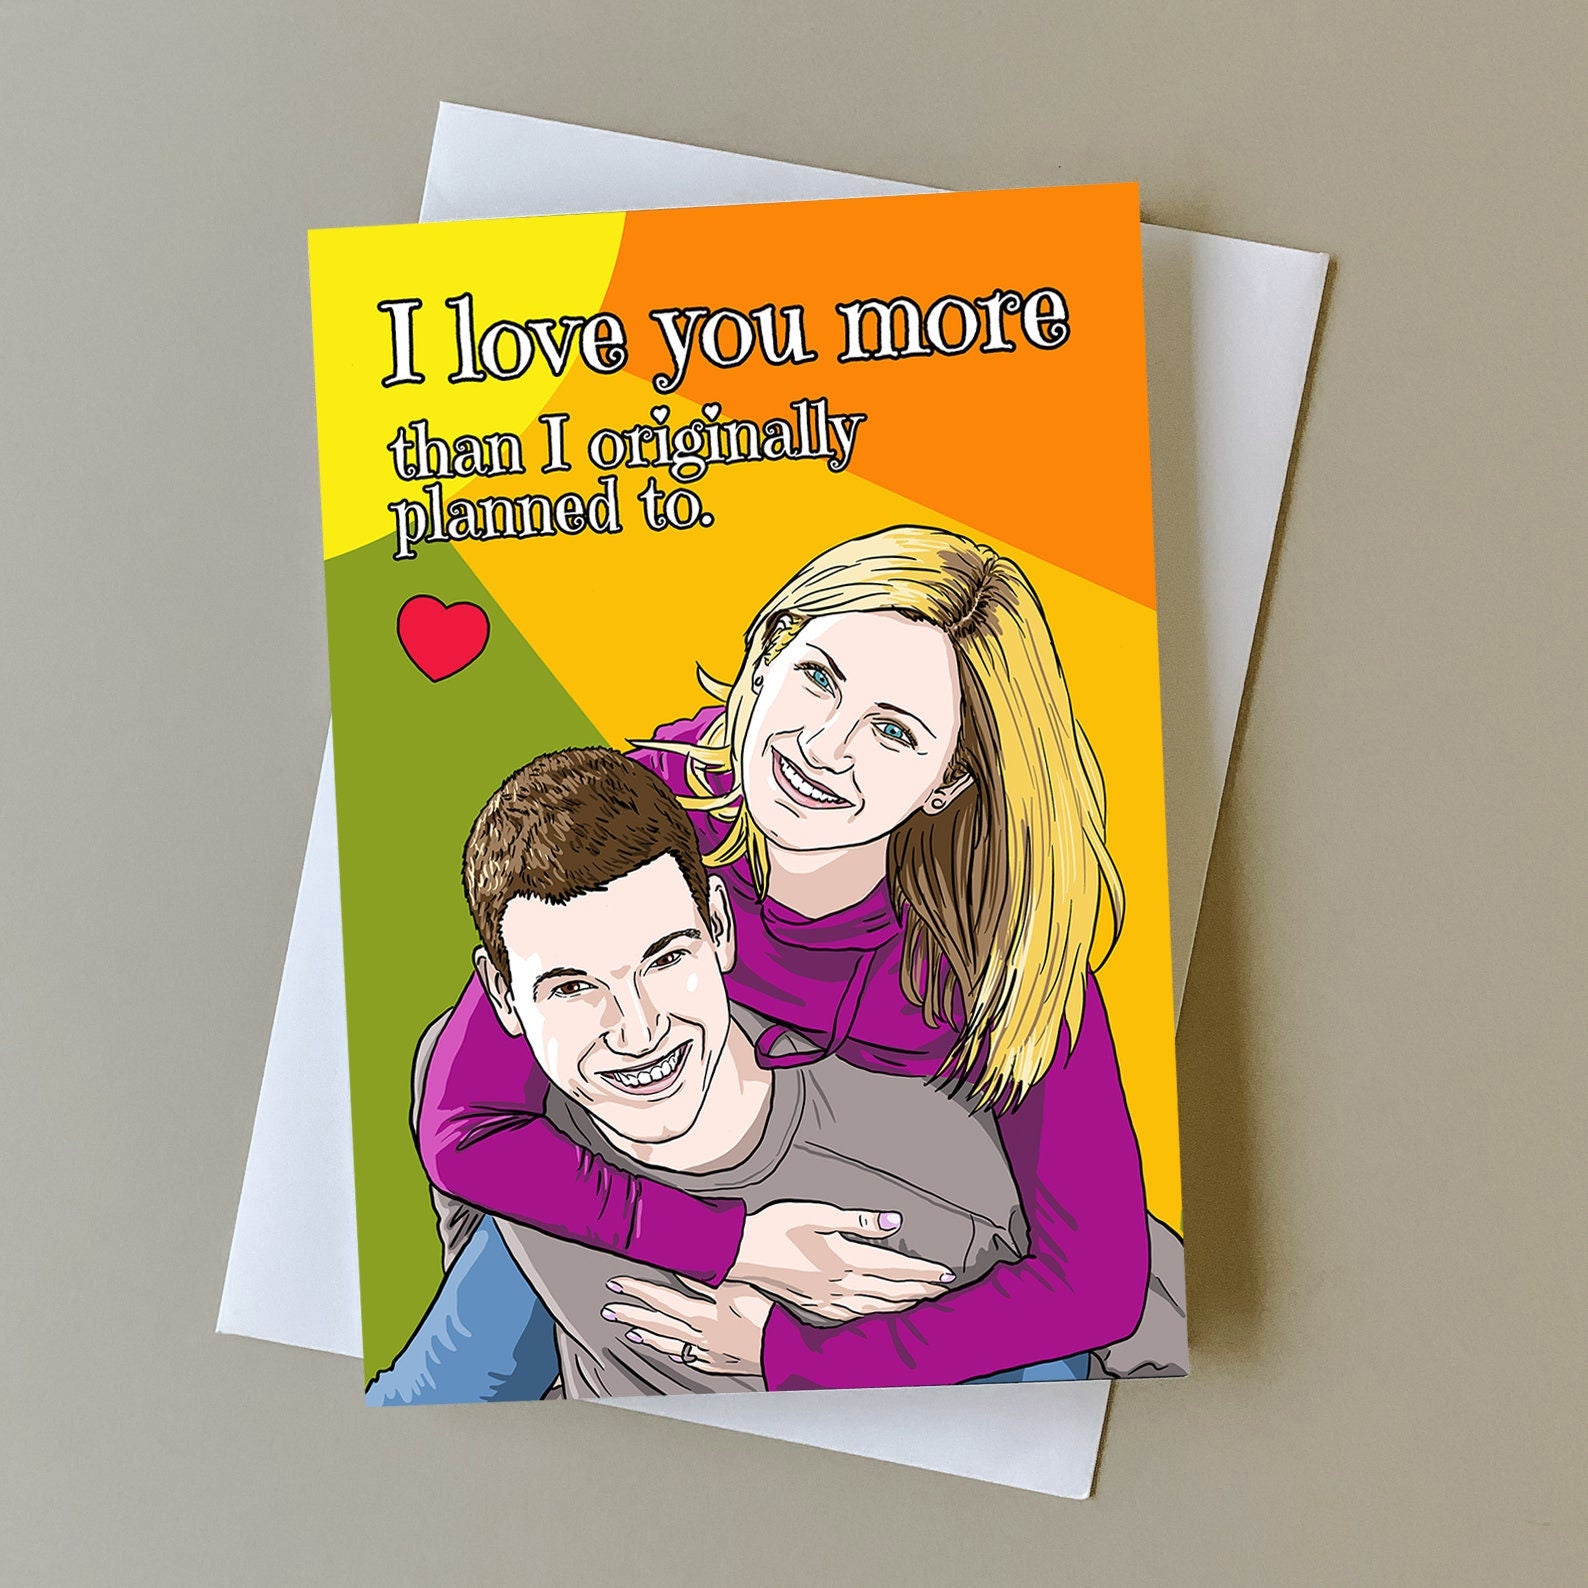 Funny Valentine's day card, "I love you more than I originally planned to", humorous card, love joke card, greeting card, relationship card